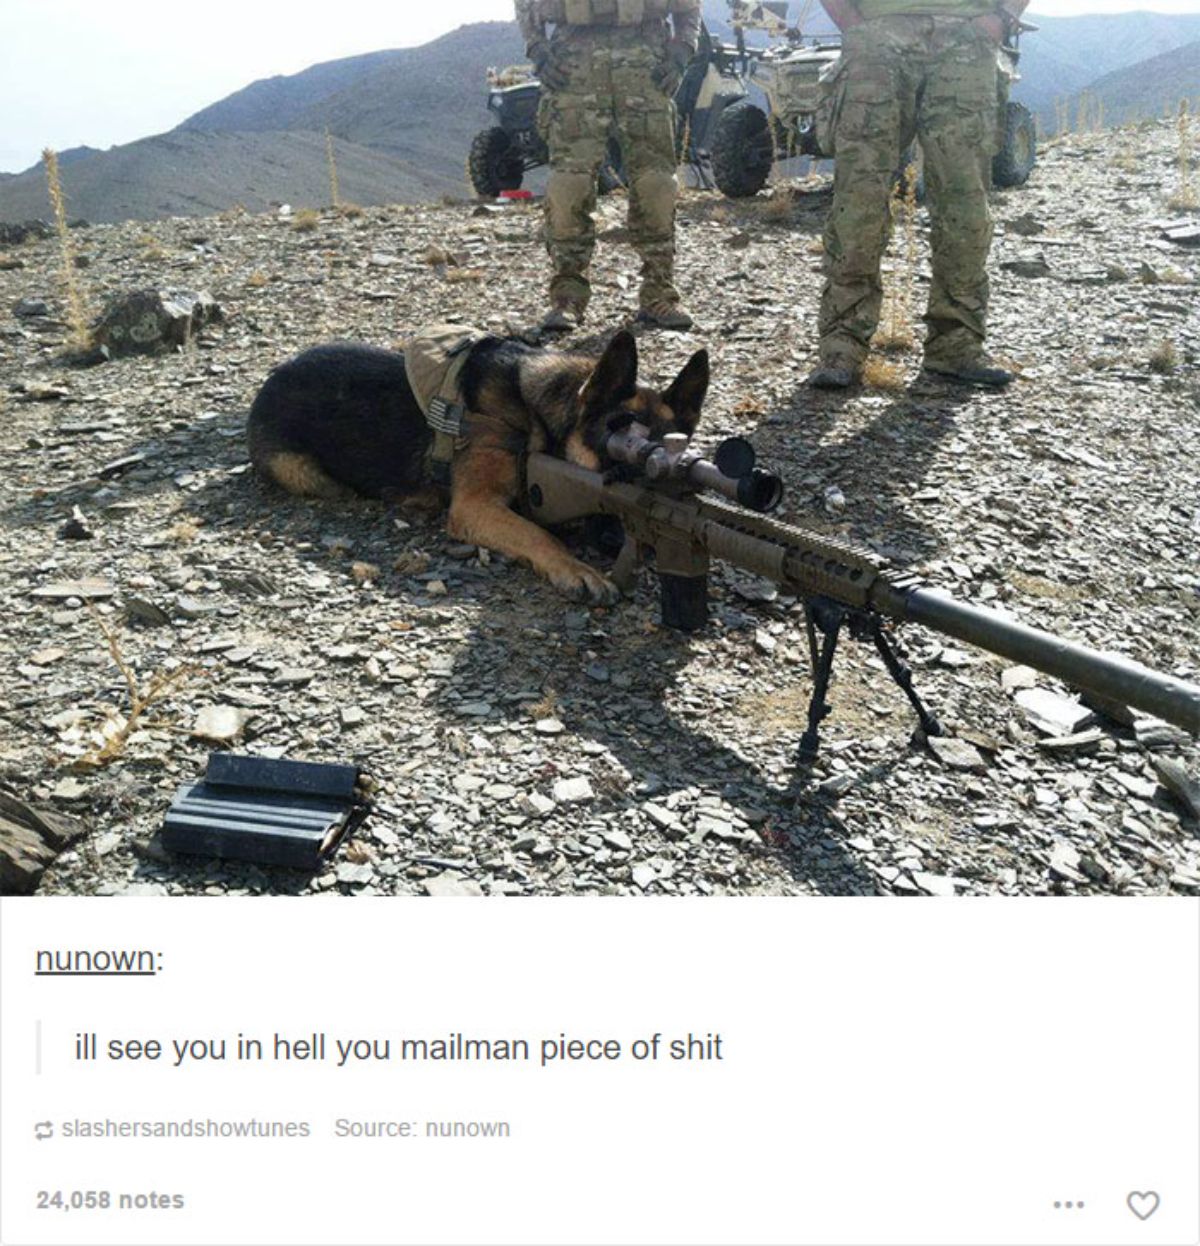 german shepherd with a brown harness on laying on the ground looking through a rifle with 2 soldiers standing nearby